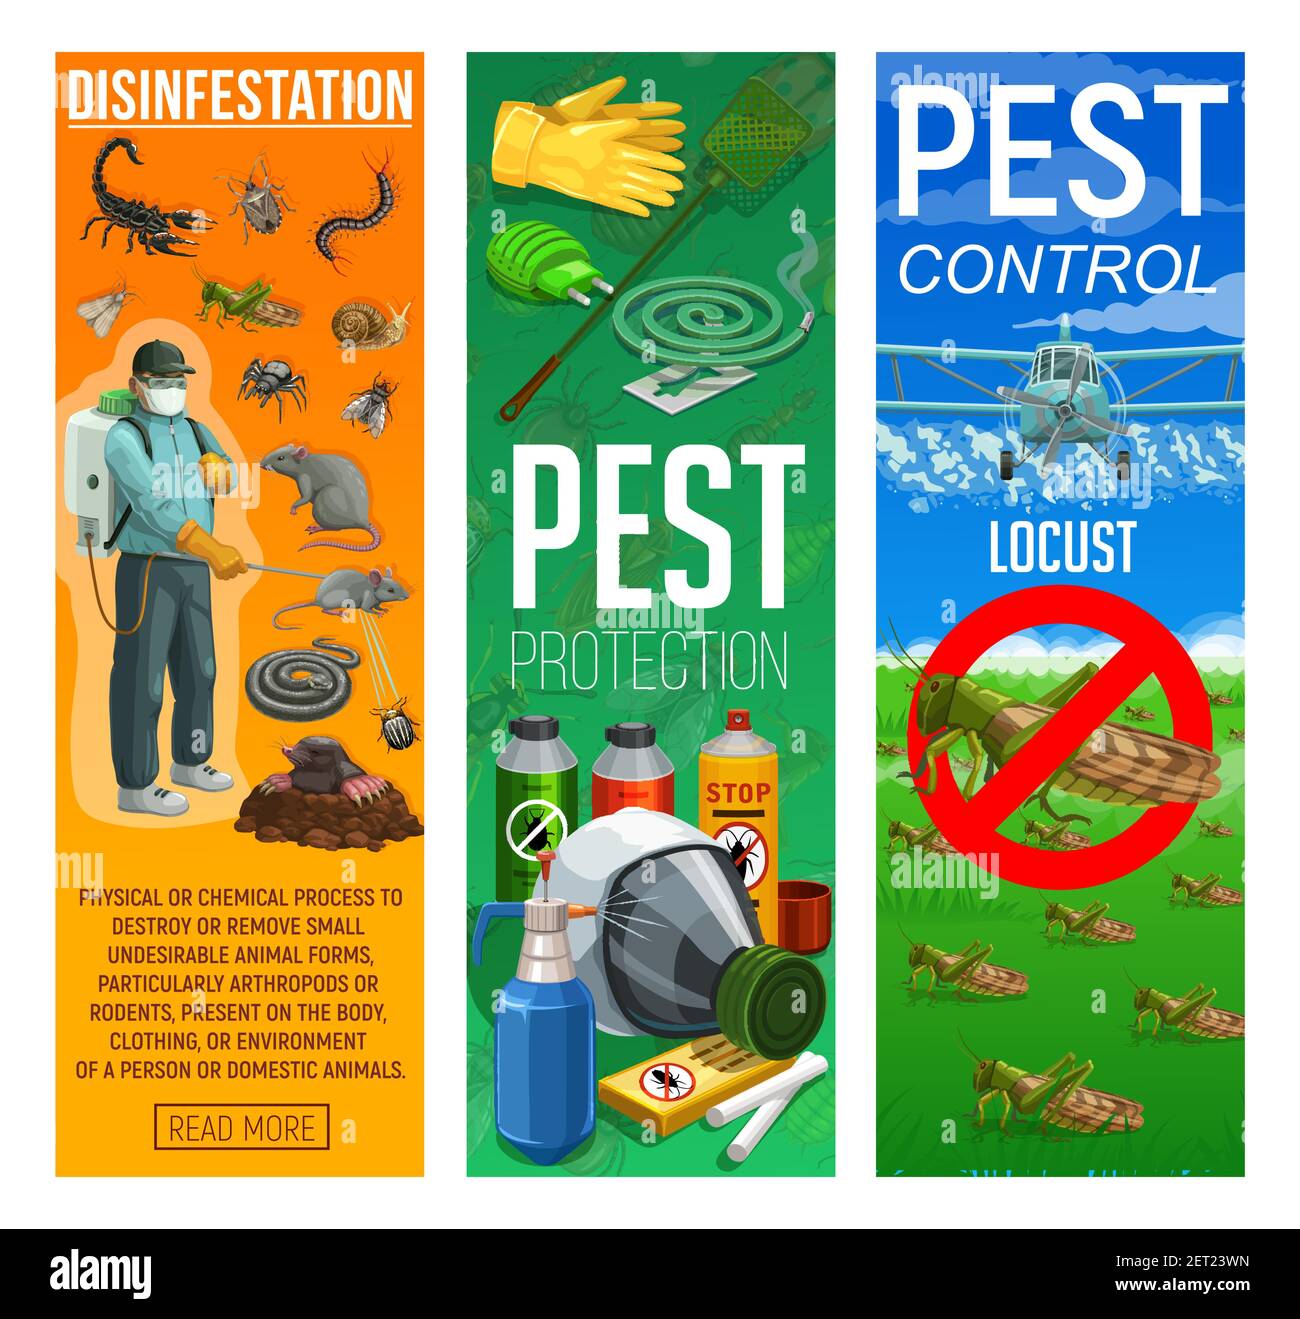 Deratization and disinfection, rodents and insects pests control banners. Pest control worker with insecticide or poison sprayer, airplane spraying pe Stock Vector